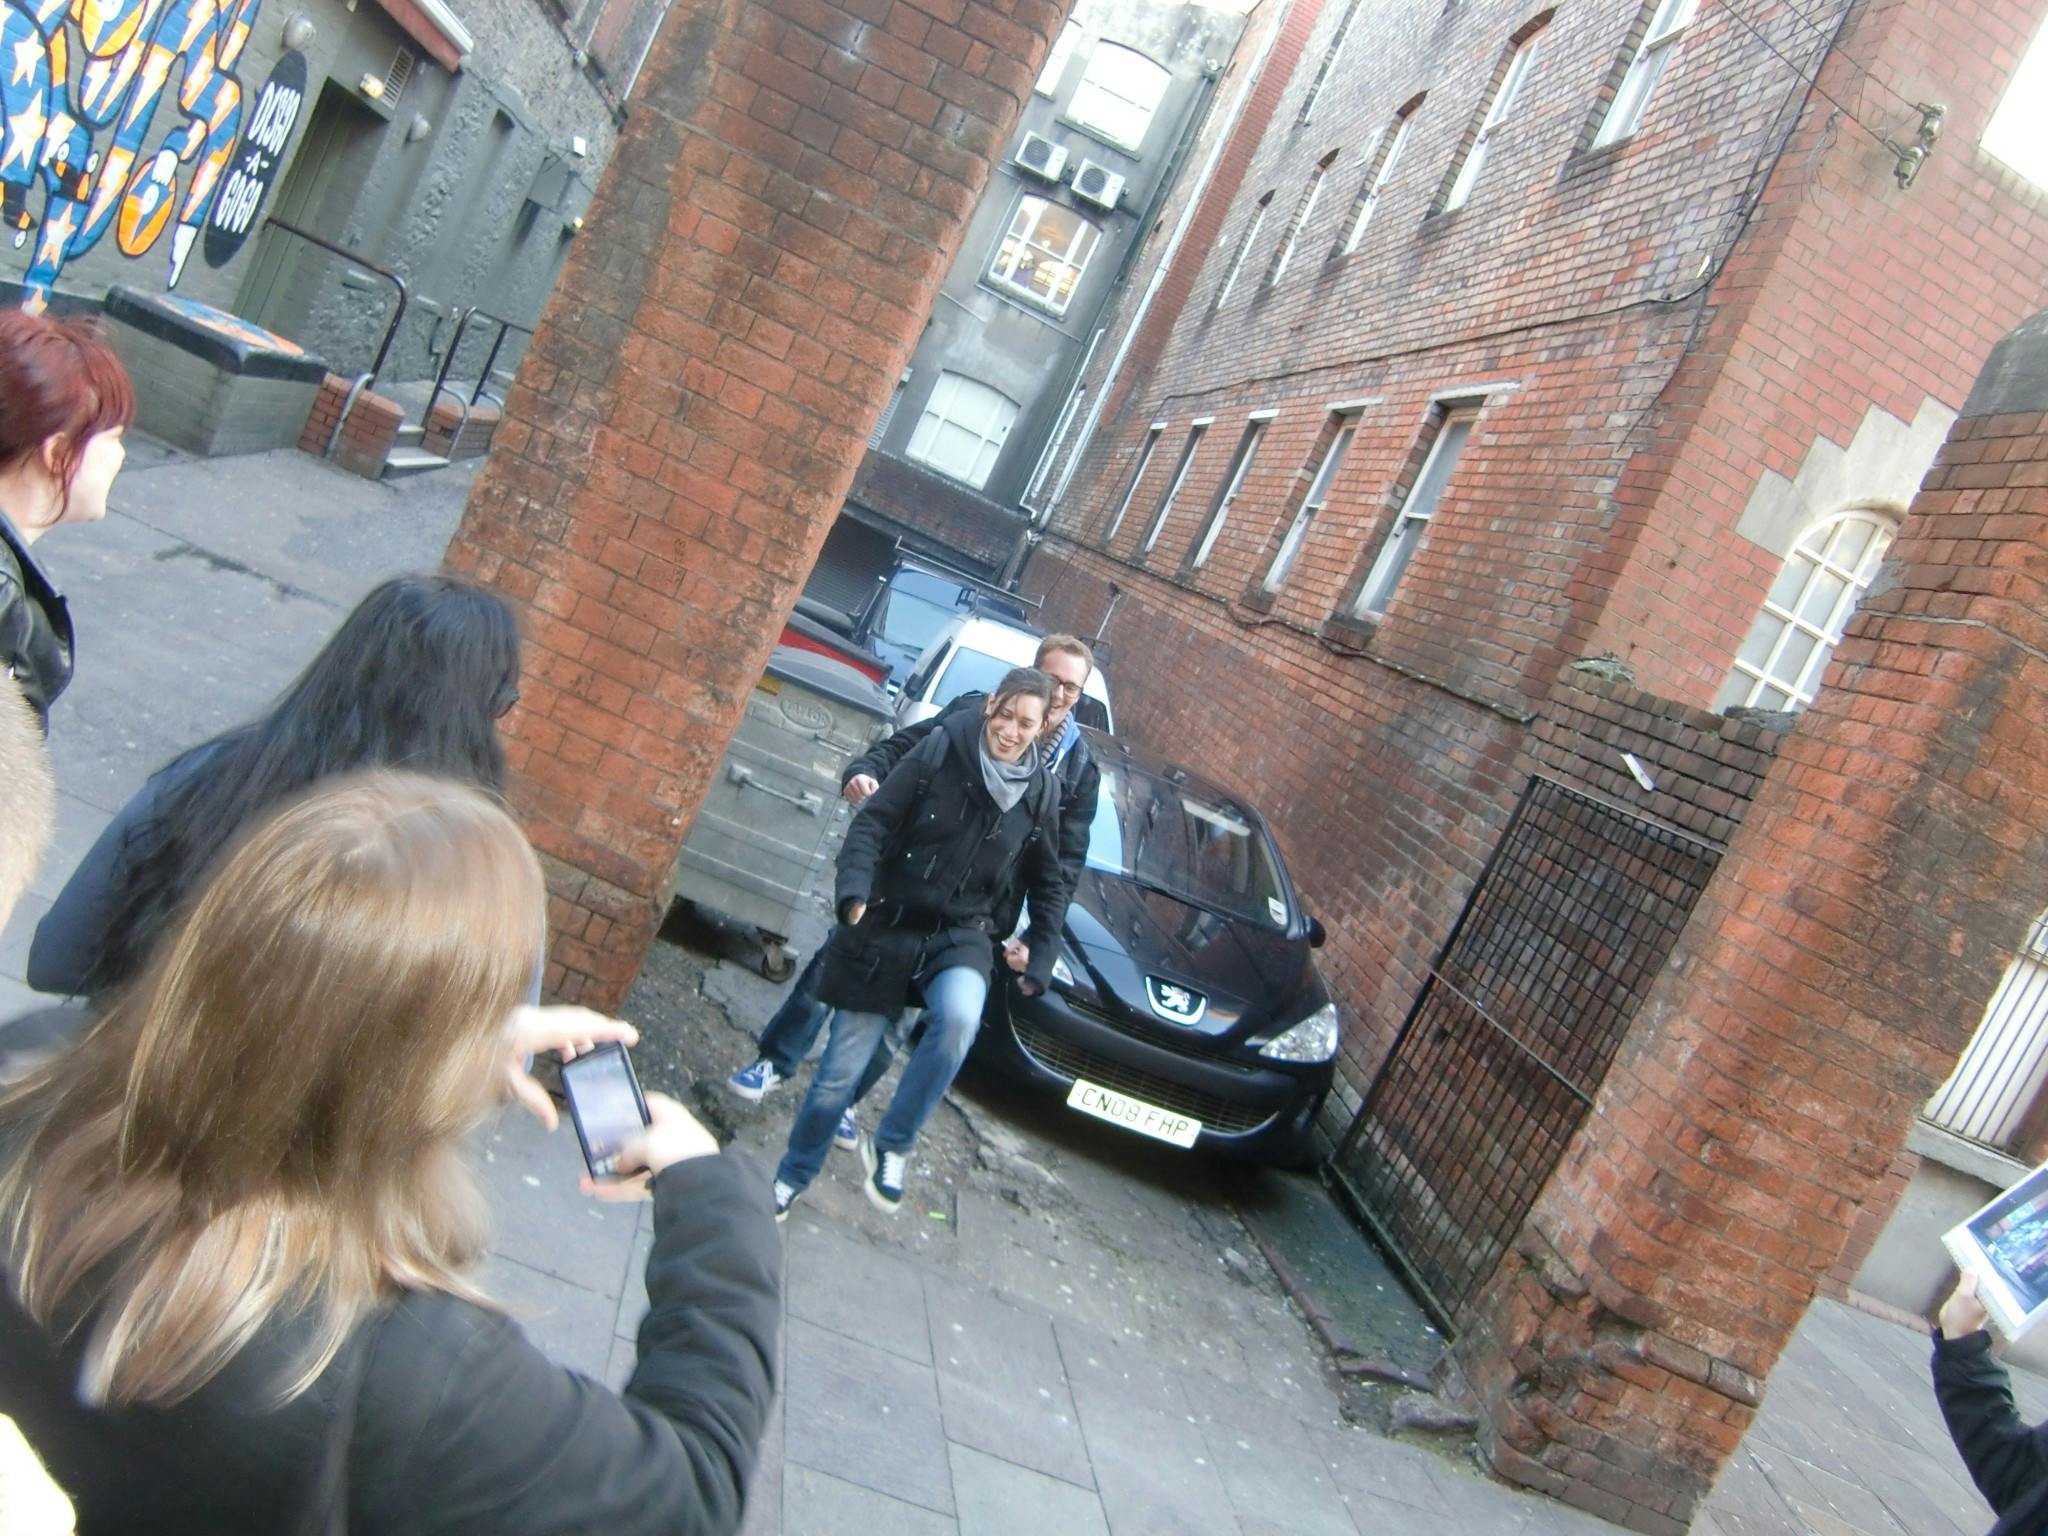 Doctor Who walking tour alley Brit Movie Tours.jpg